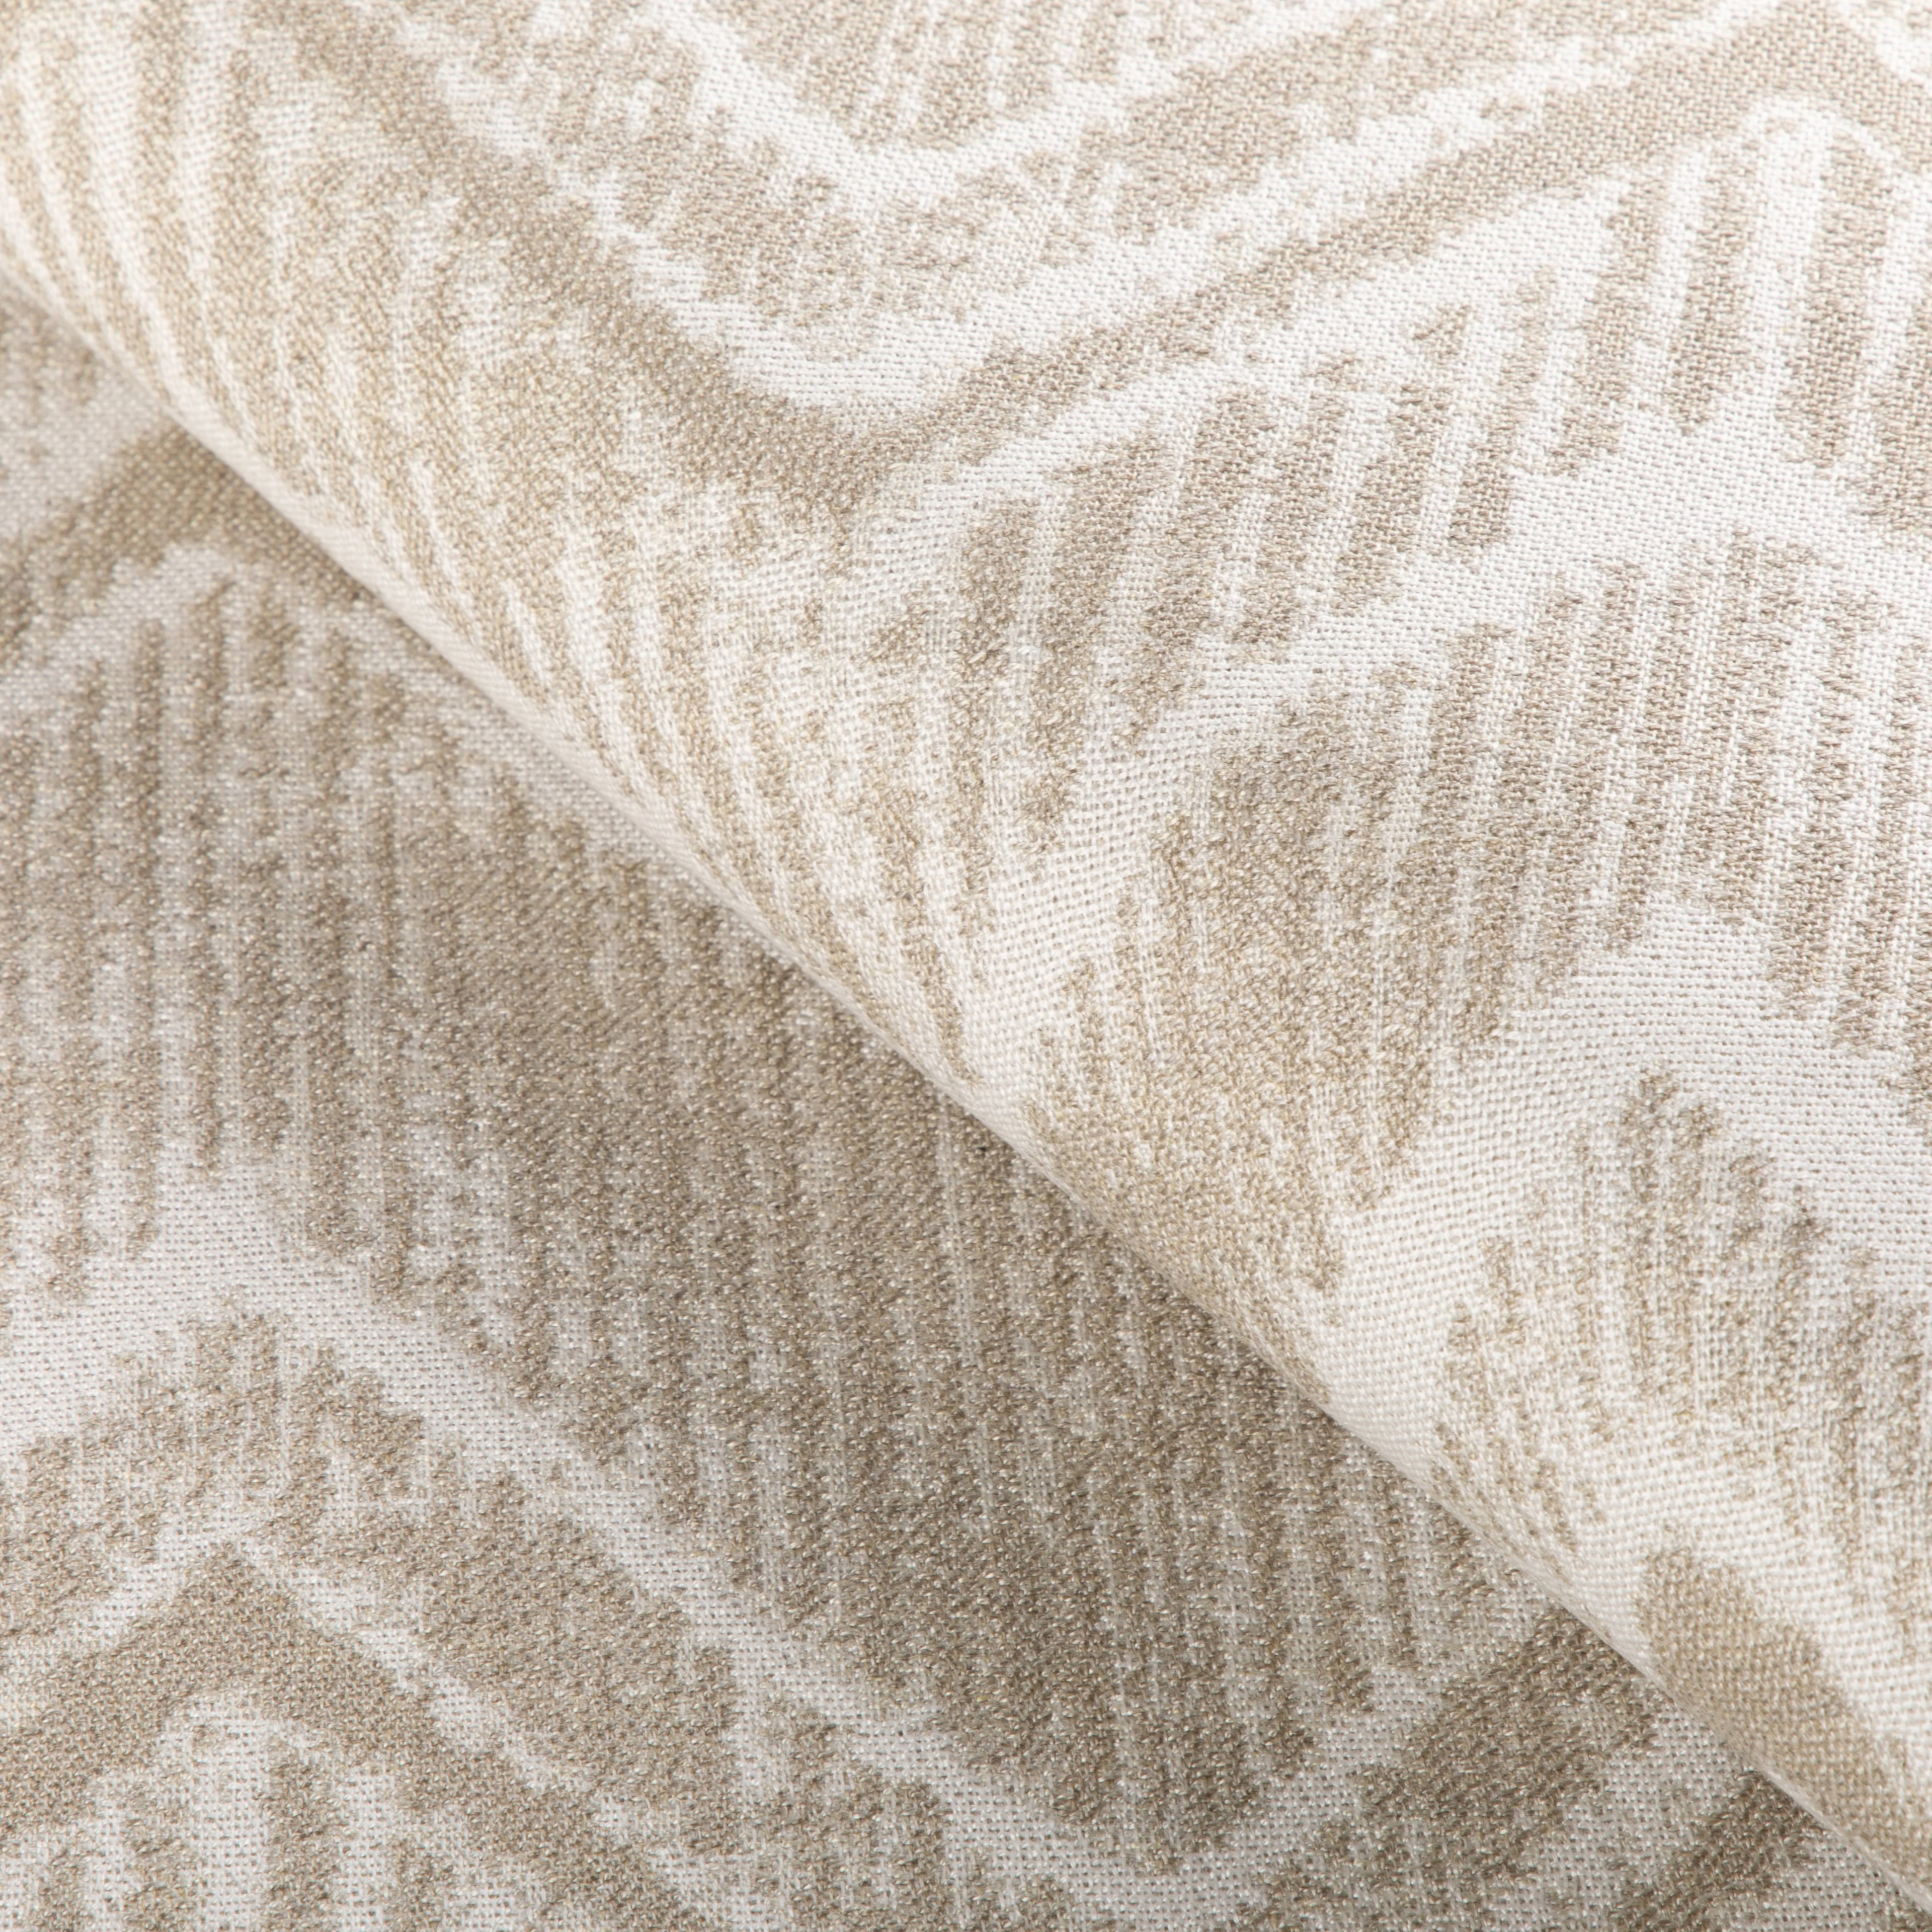 Alternate view of Riviera Batik fabric in sand color - pattern 36934.16.0 - by Kravet Couture in the Riviera collection